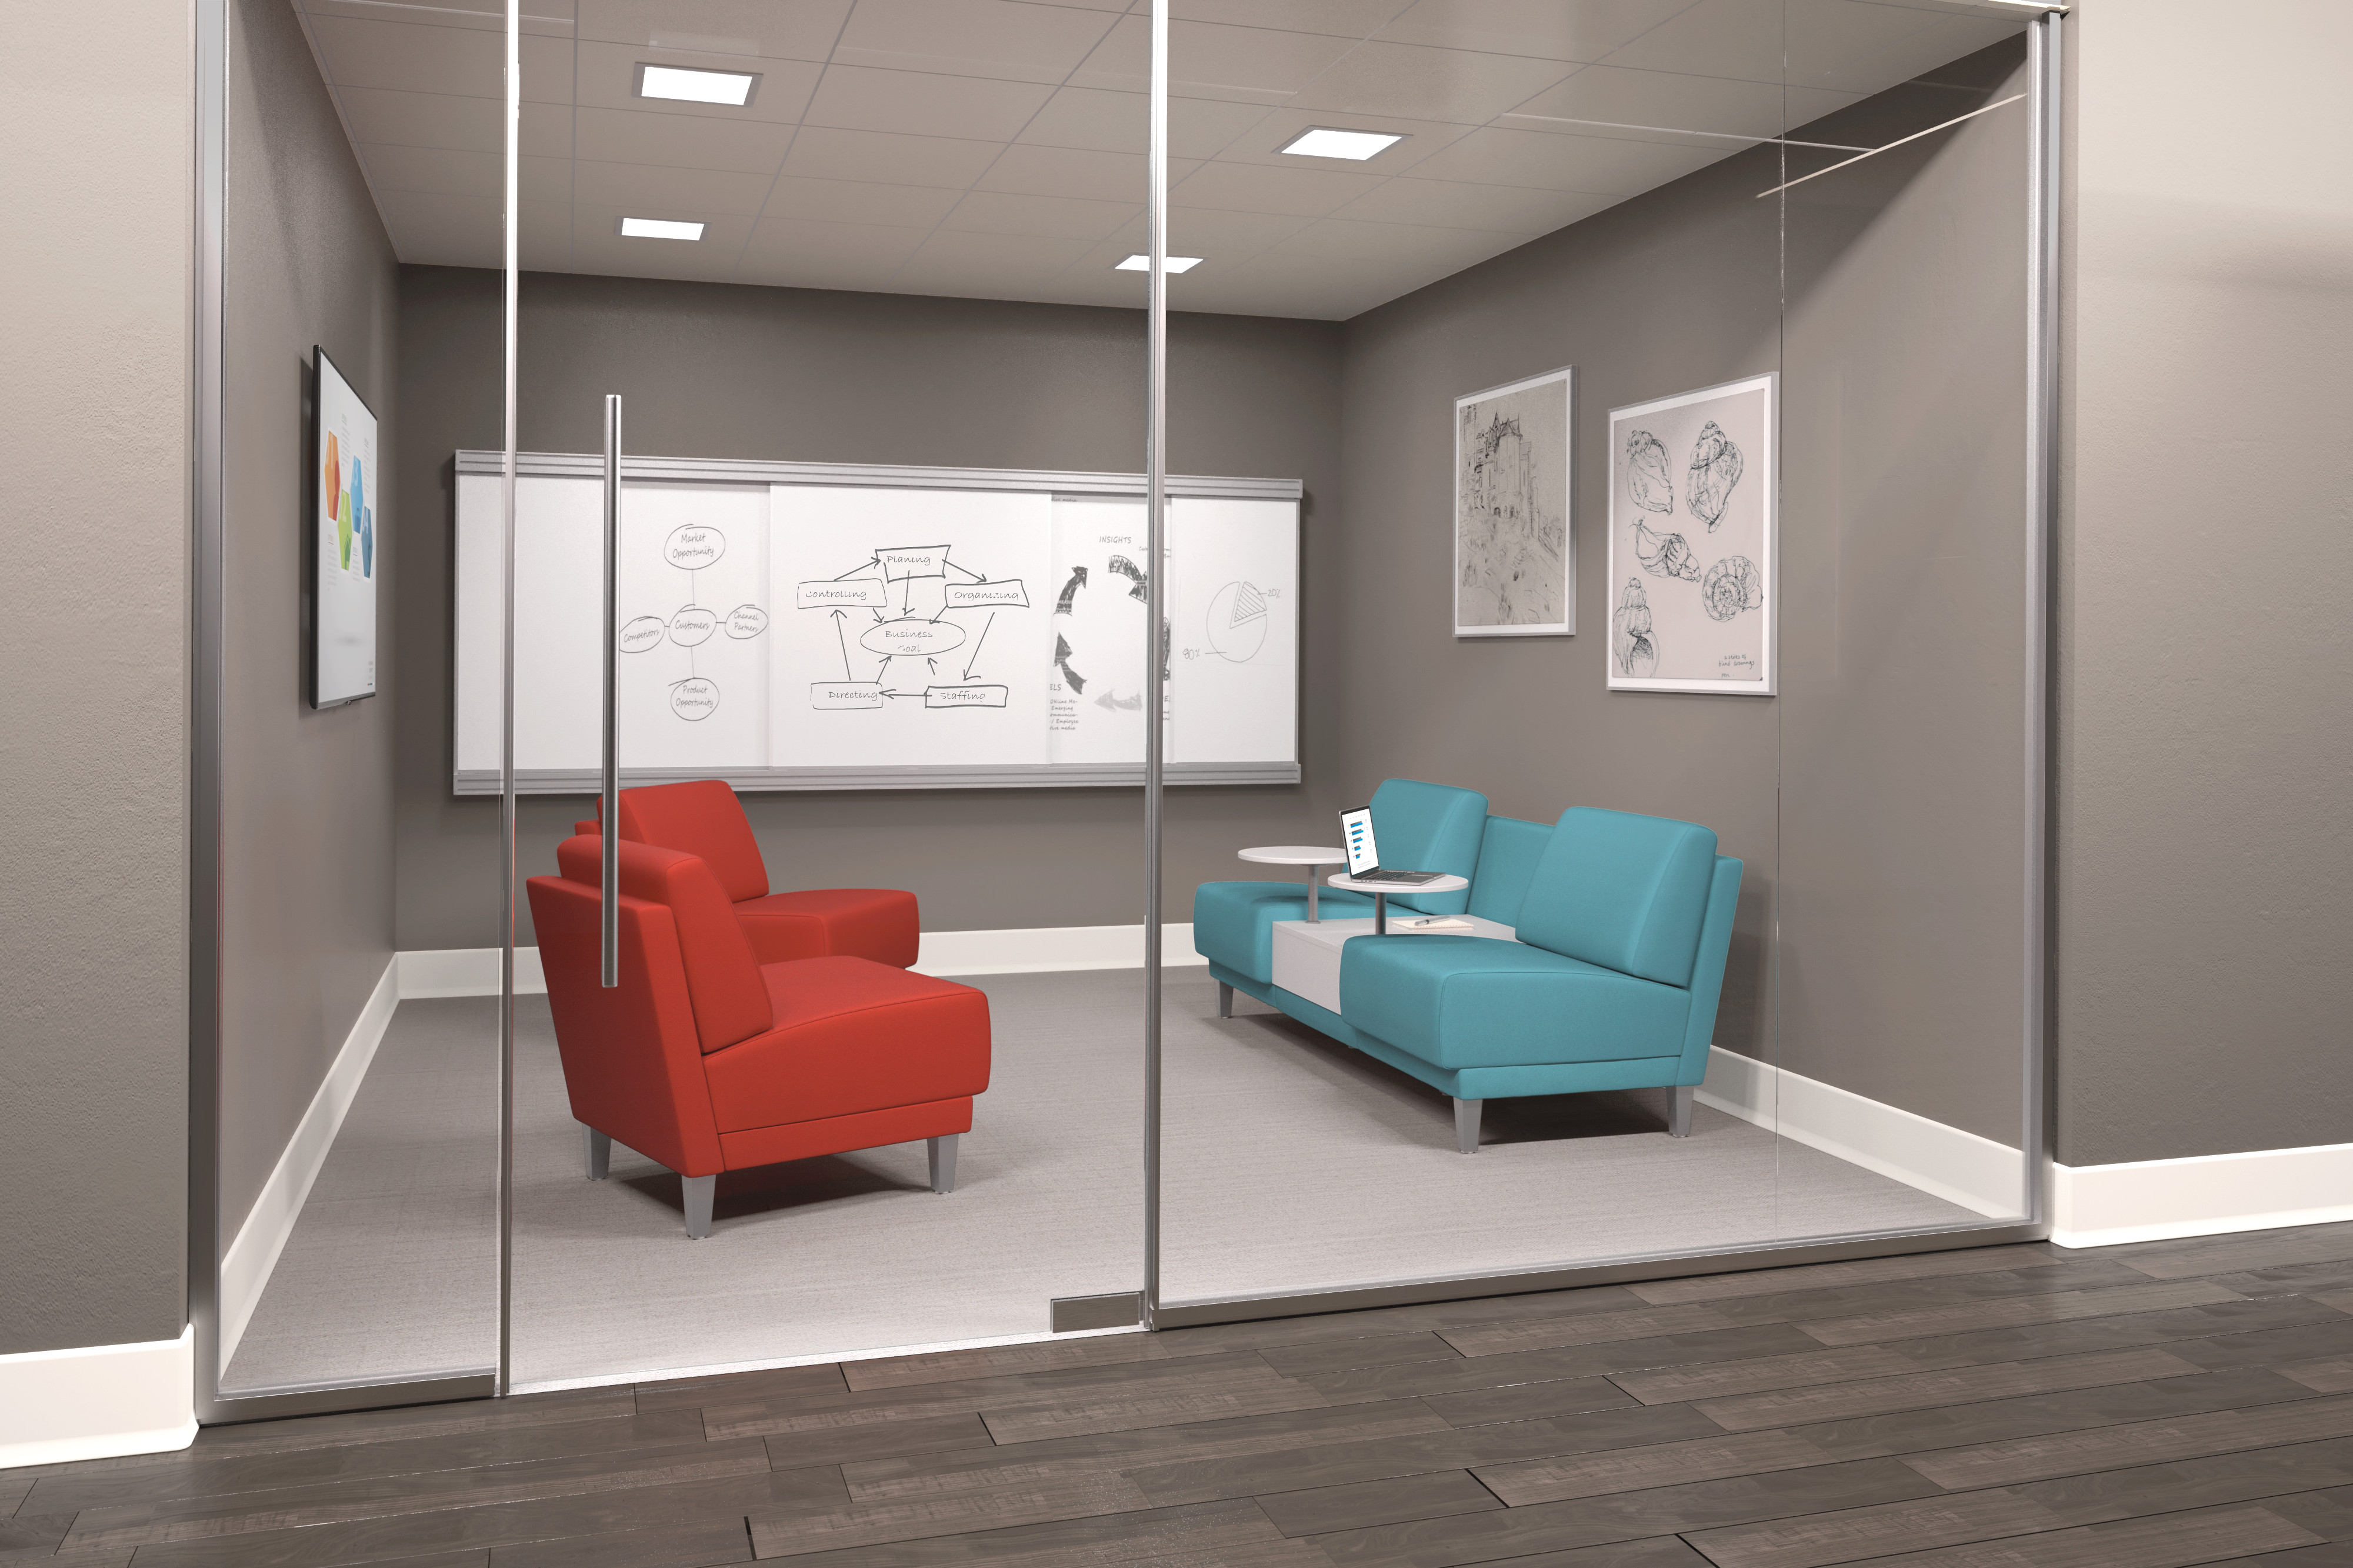 Collaborate comfortable with new Grove soft seating from HON